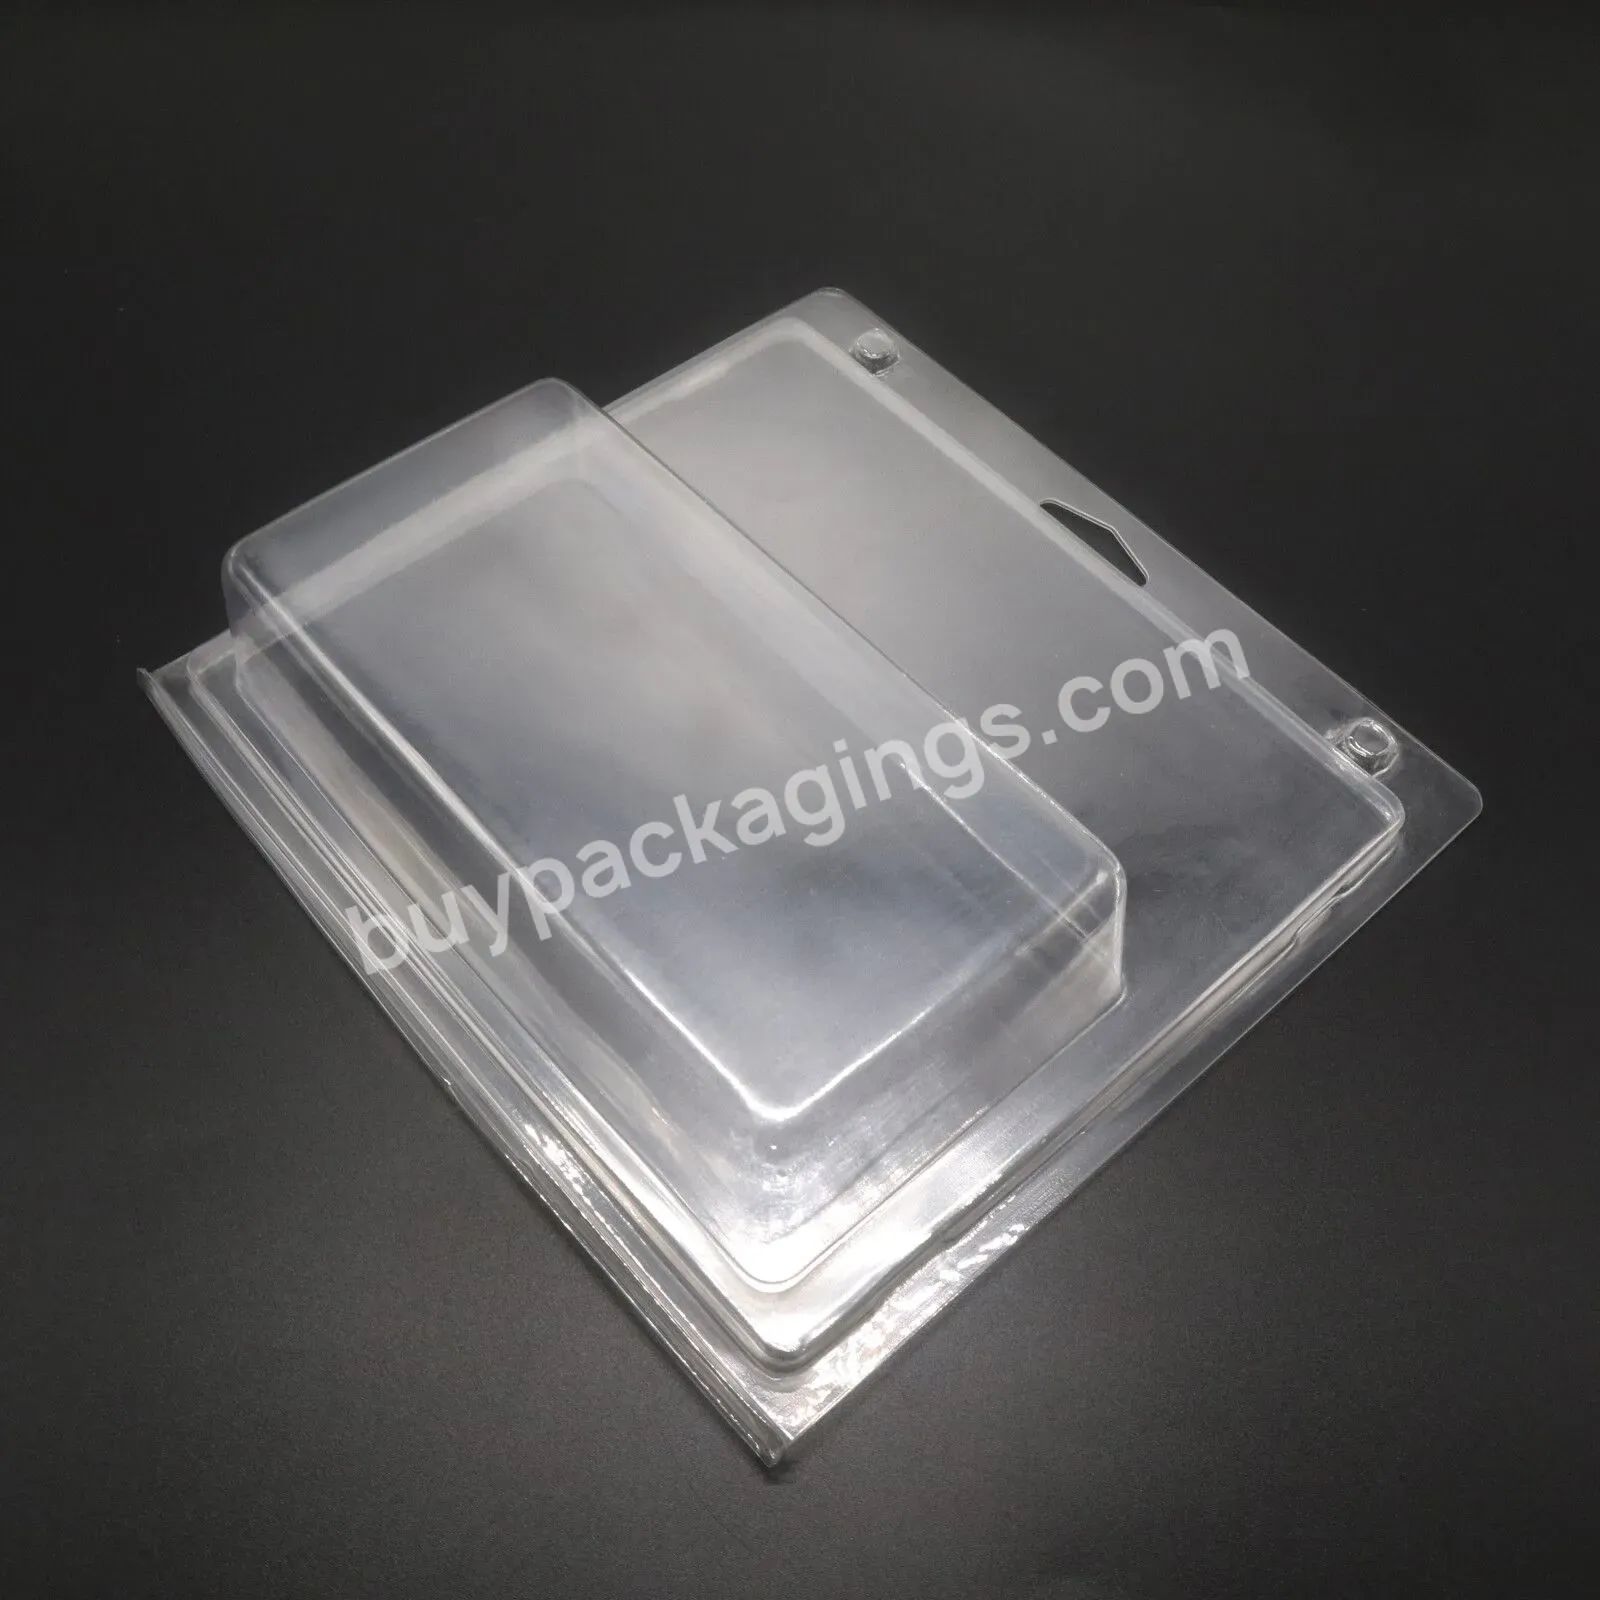 Pvc Blister Sealing Small Packaging Cartridge Plastic Design Stock Clear Clamshell Disposable Box Containers - Buy Plastic Stock Clear Clamshell Box,Pvc Clamshell Disposable Box Packaging,Clear Clamshell Containers.